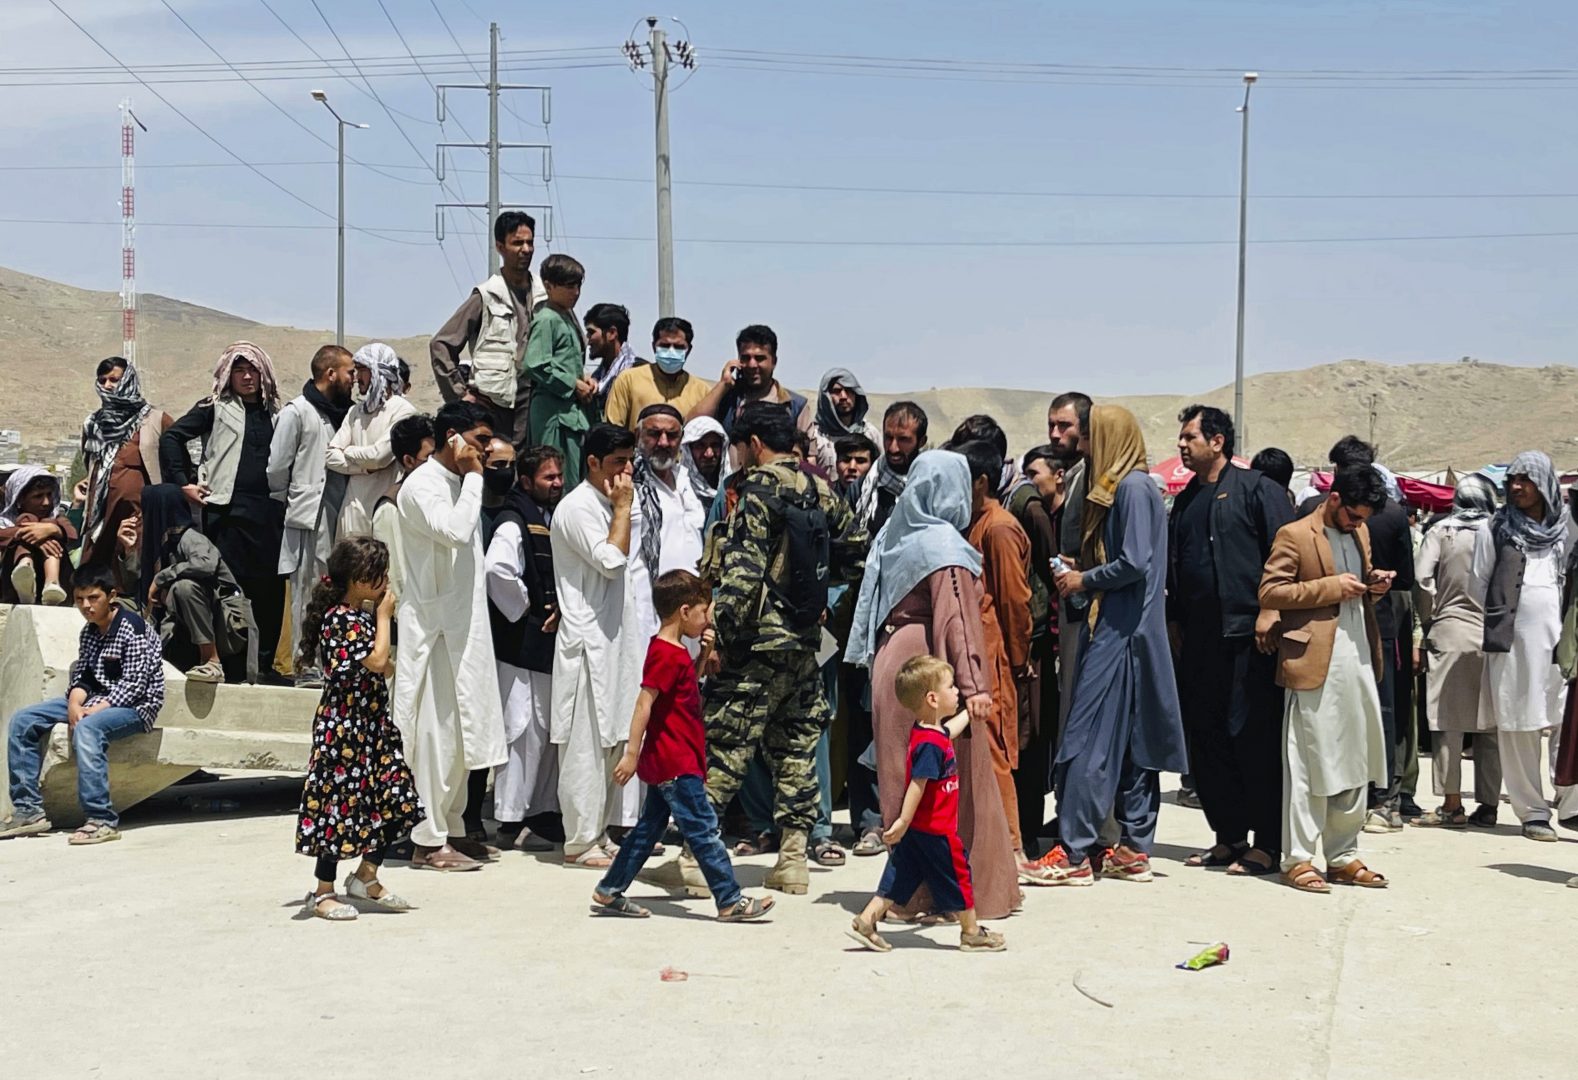 Hundreds of people gather outside the international airport in Kabul, Afghanistan, Tuesday, Aug. 17, 2021. The Taliban declared an “amnesty” across Afghanistan and urged women to join their government Tuesday, seeking to convince a wary population that they have changed a day after deadly chaos gripped the main airport as desperate crowds tried to flee the country.